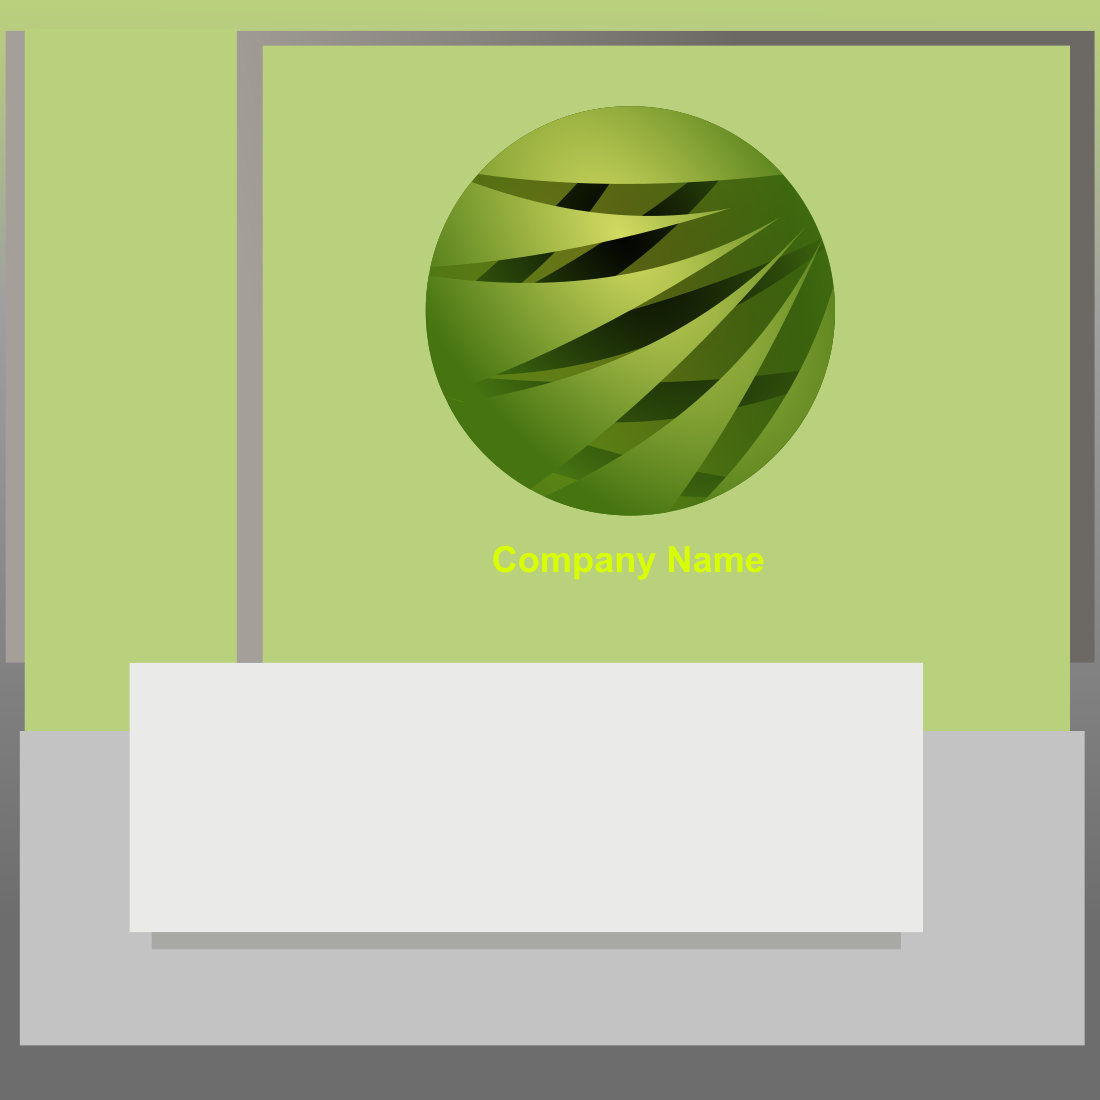 Green logo for some eco topics.